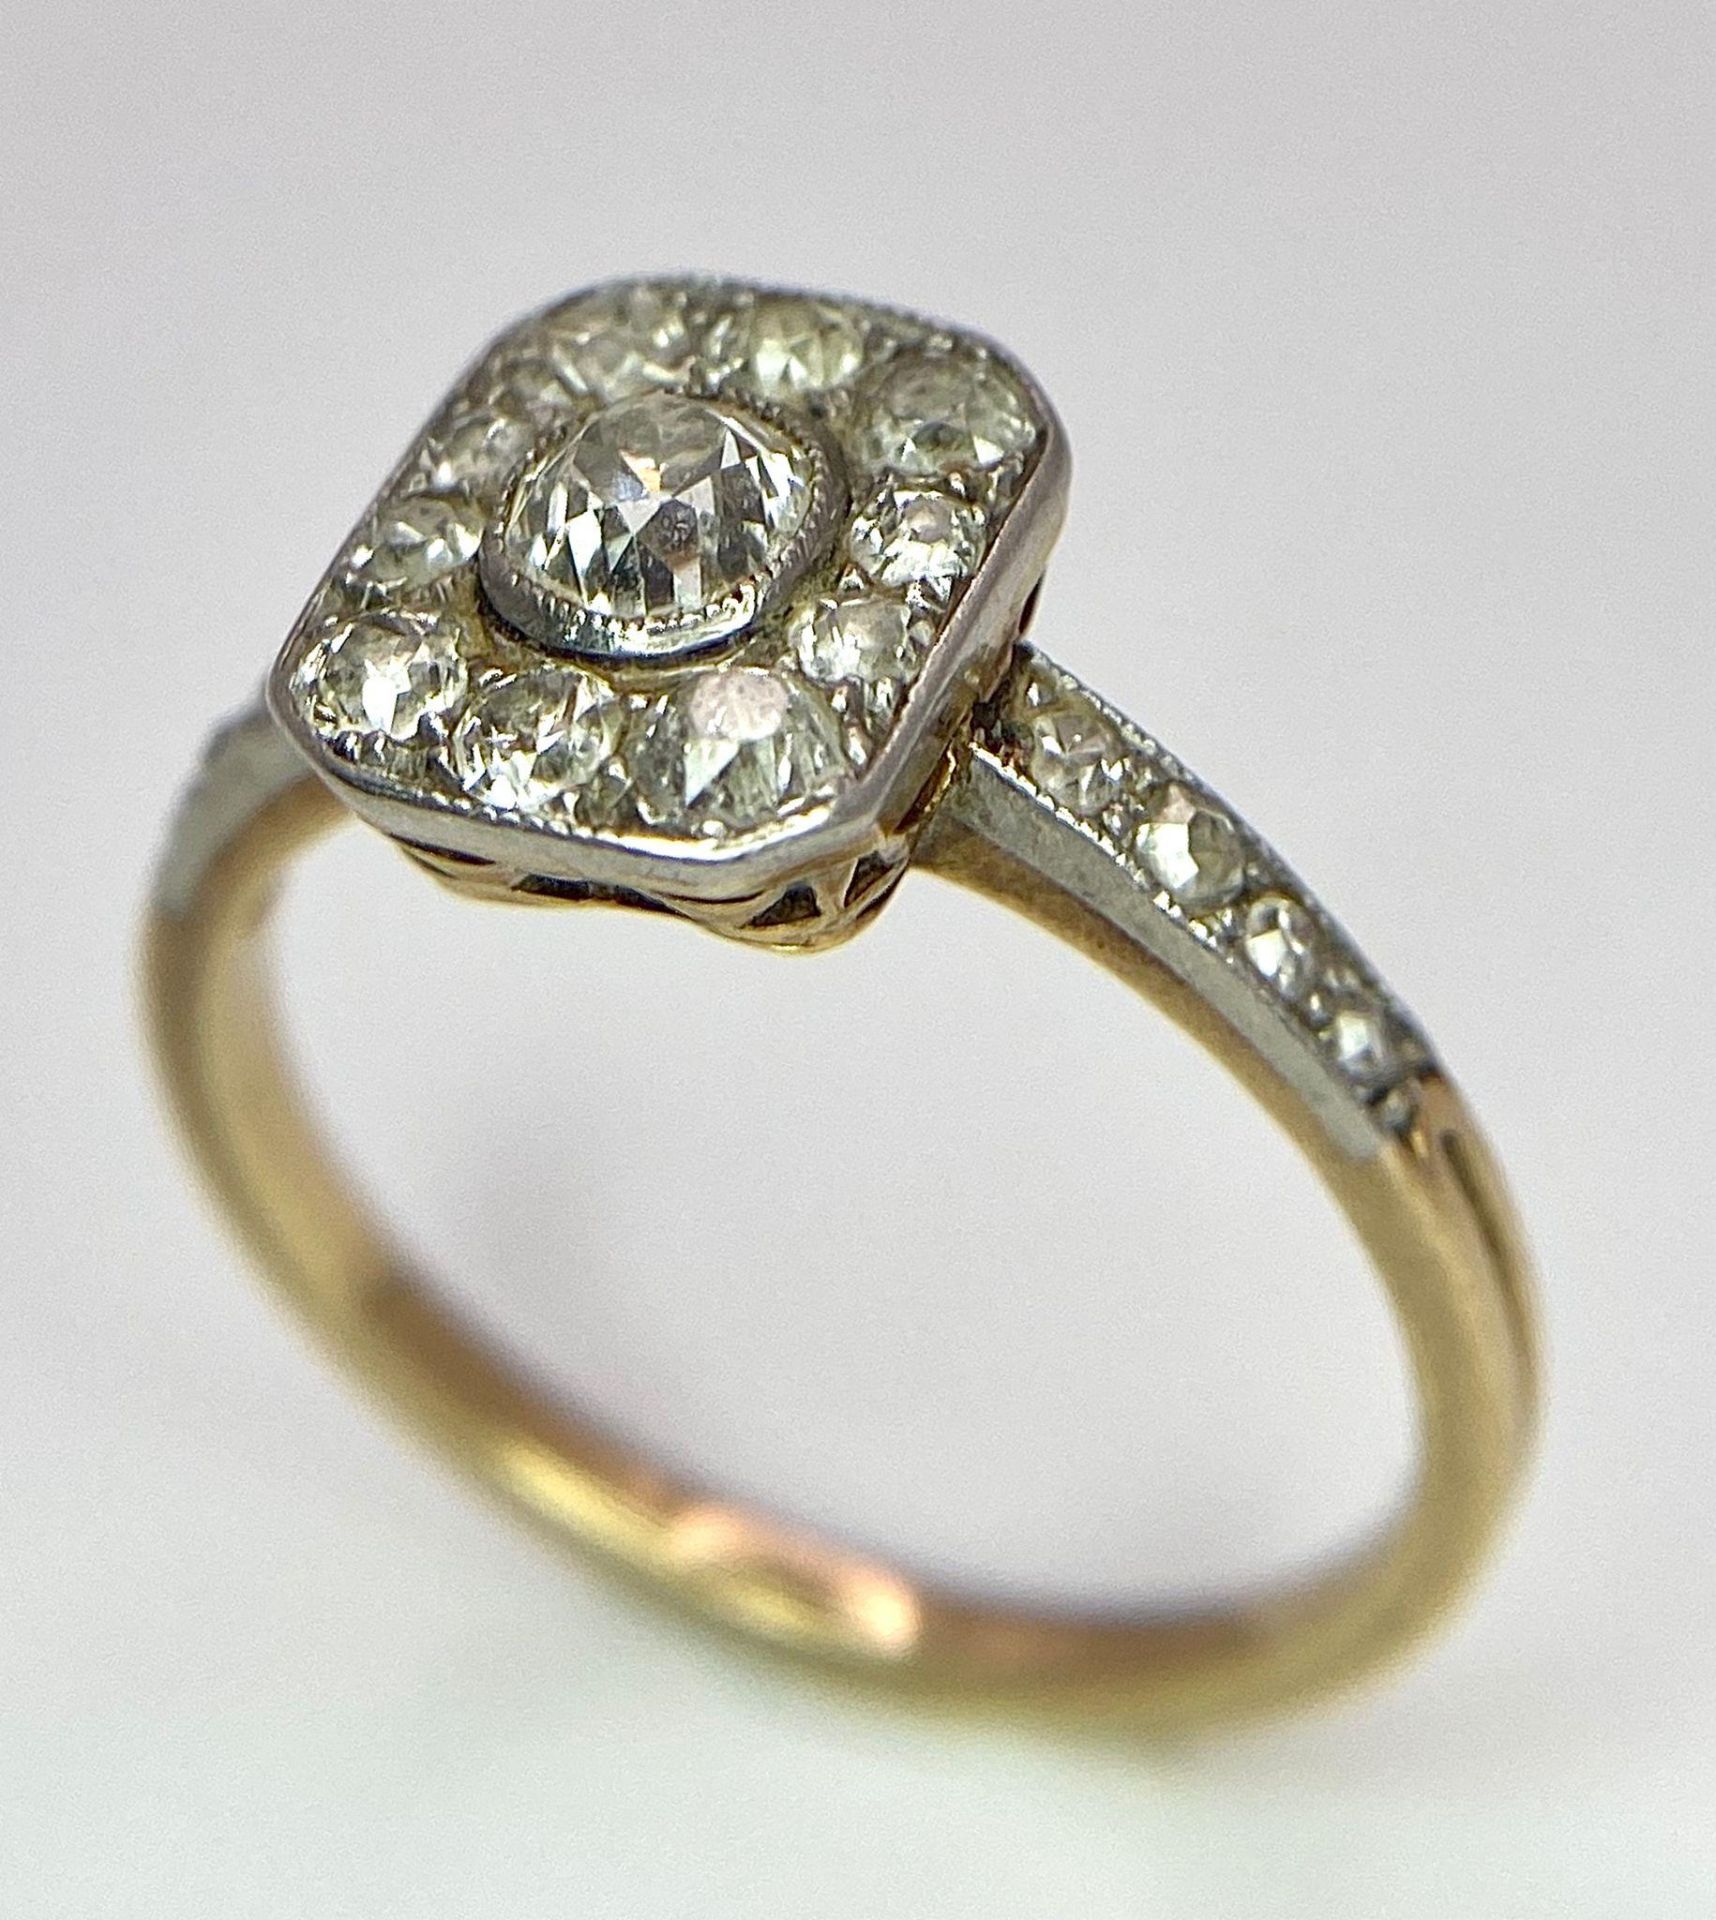 A 9 K yellow gold ring with an ART DECO style diamond cluster and more diamonds on the shoulders, - Image 2 of 8